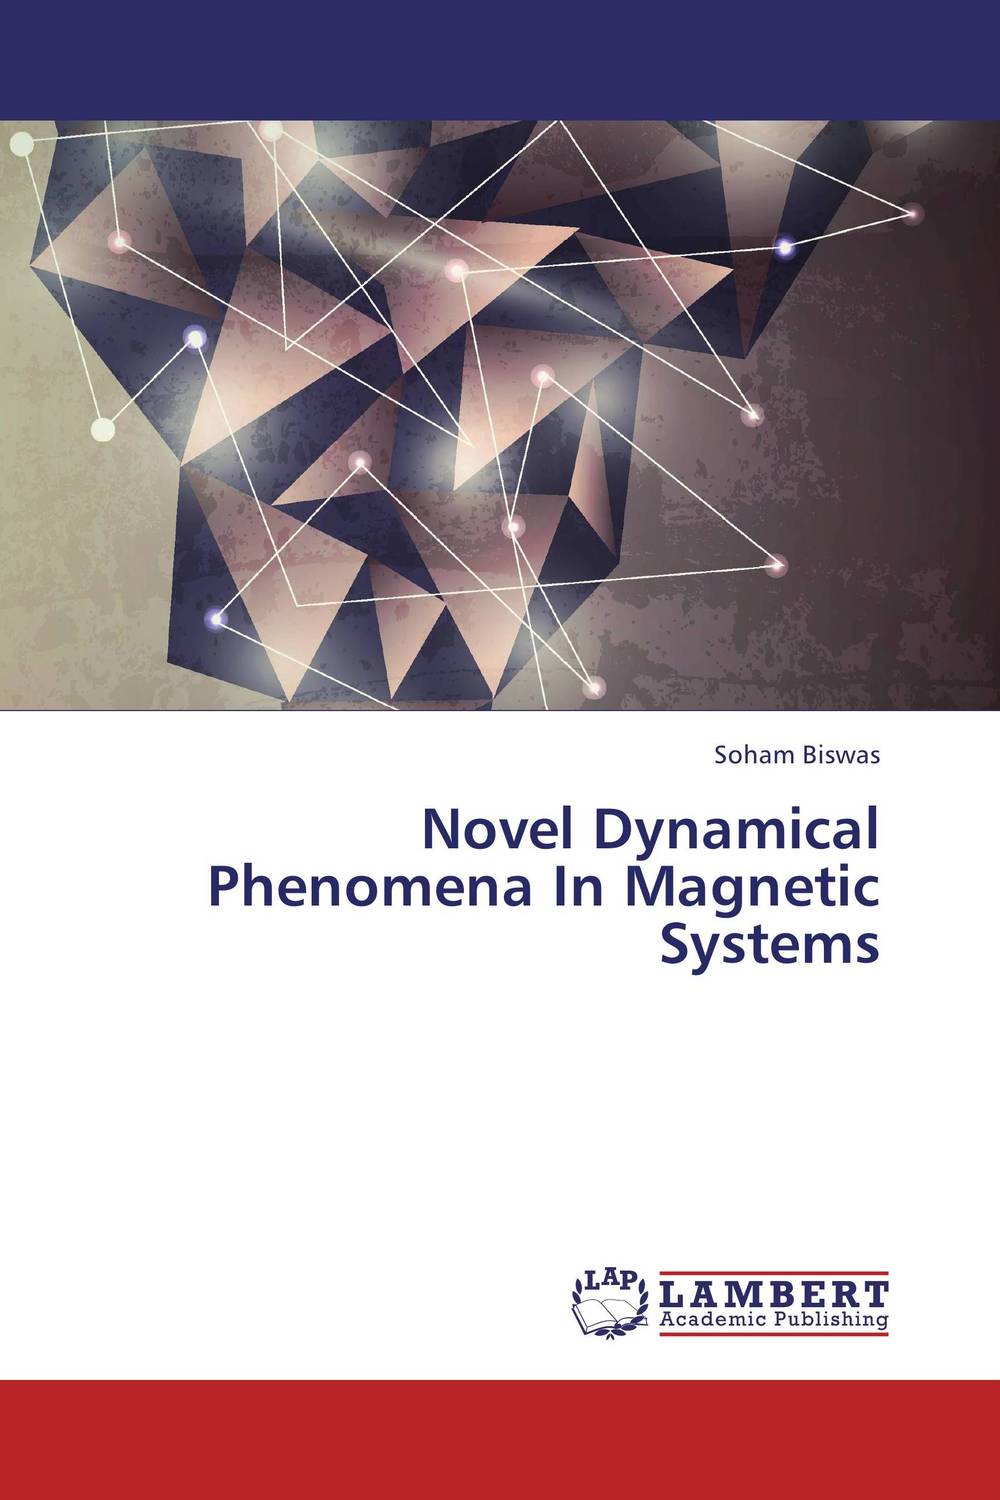 Novel Dynamical Phenomena In Magnetic Systems